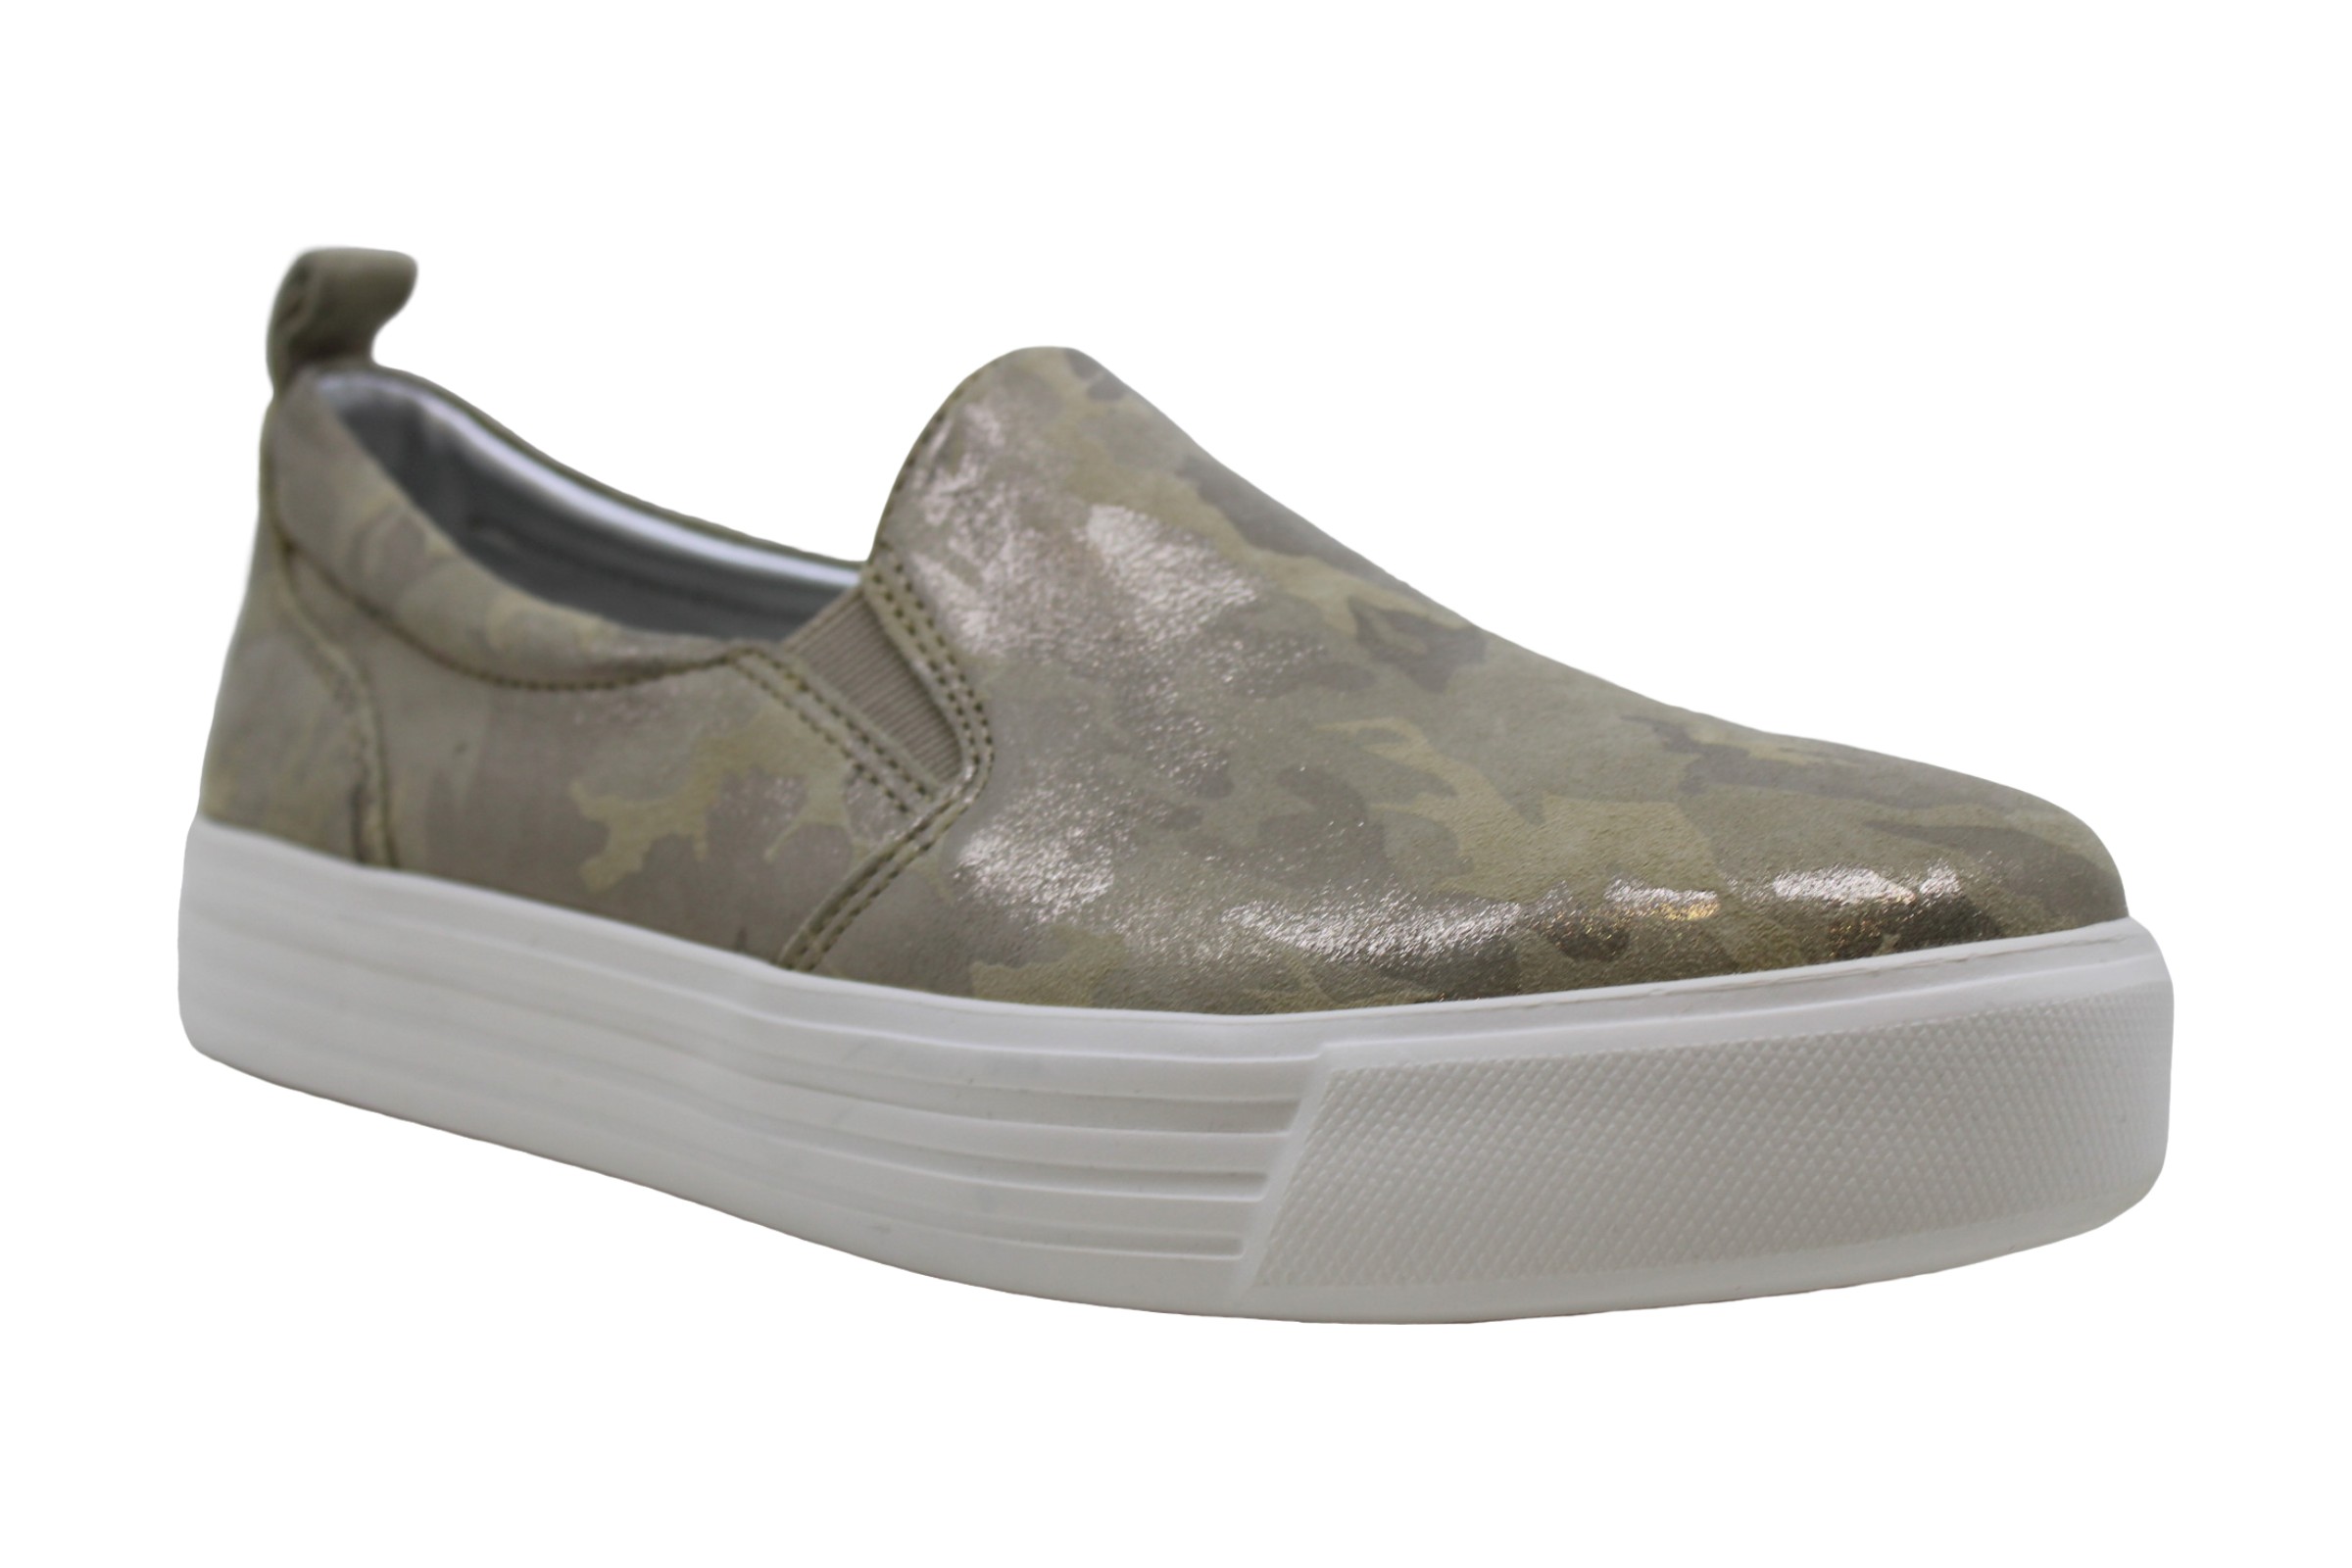 Earth Womens Rosewood Clove Leather Low Top Slip On Fashion, Grey, Size ...